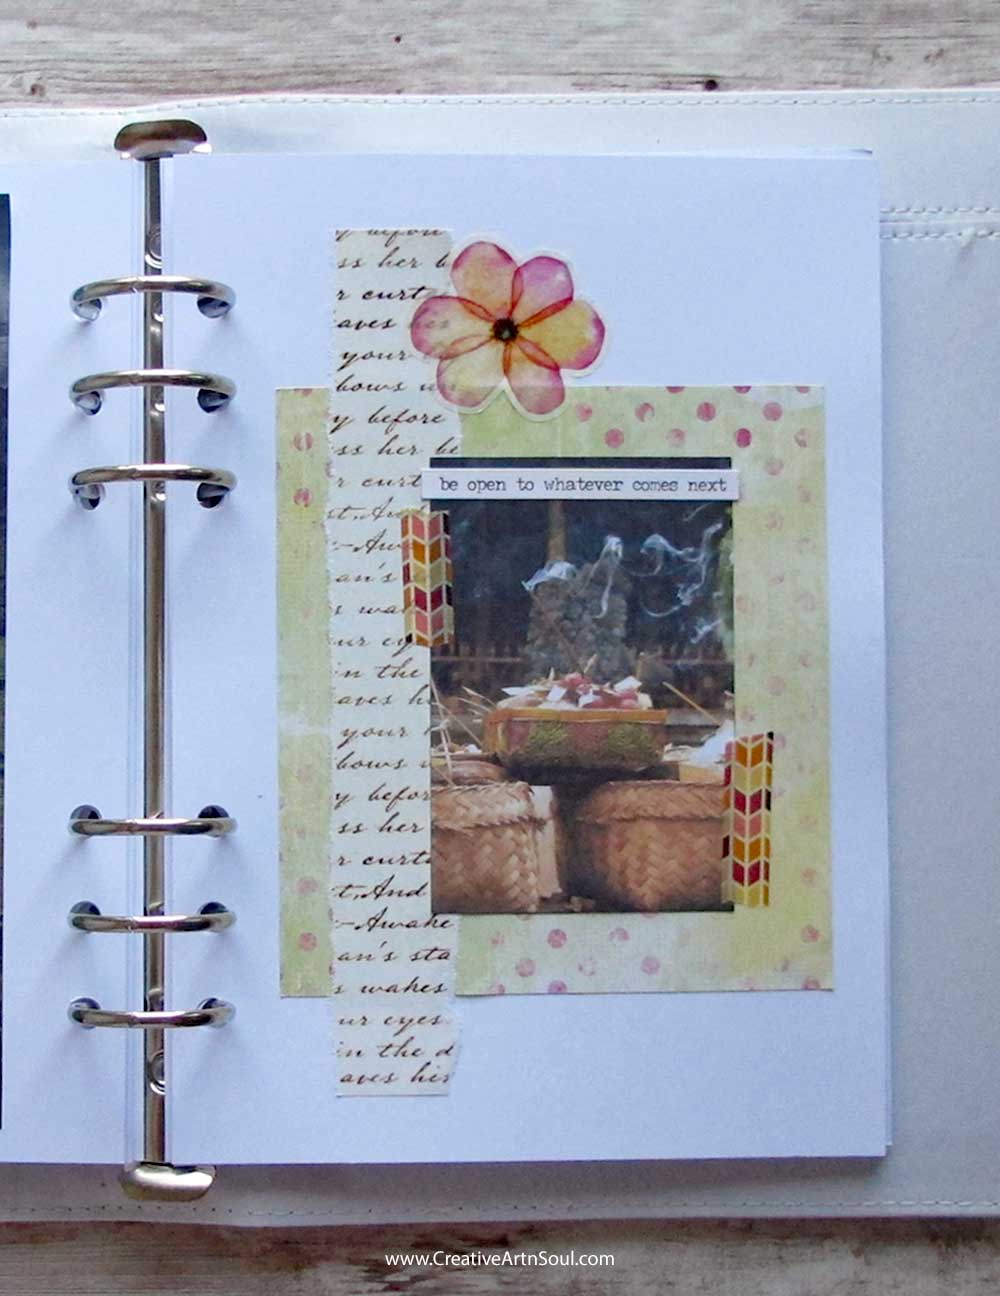 Make a Vision Board Journal to Manifest Your Goals and Dreams